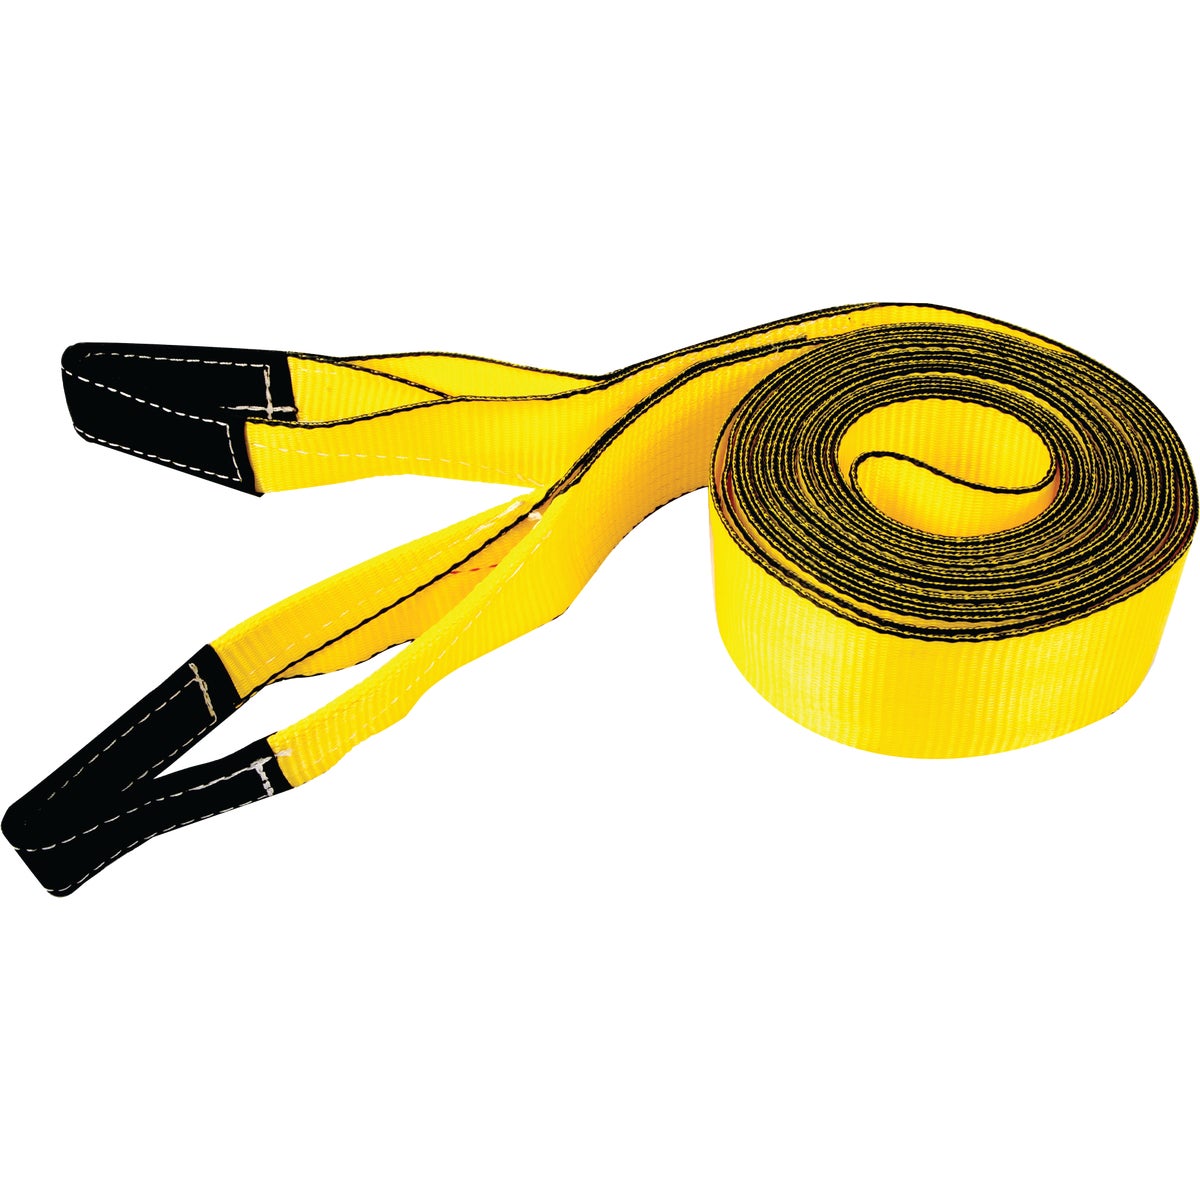 Erickson 4 In. x 30 Ft. 10,000 Lb. Safe Work Load Polyester Tow Strap with Loops, Yellow